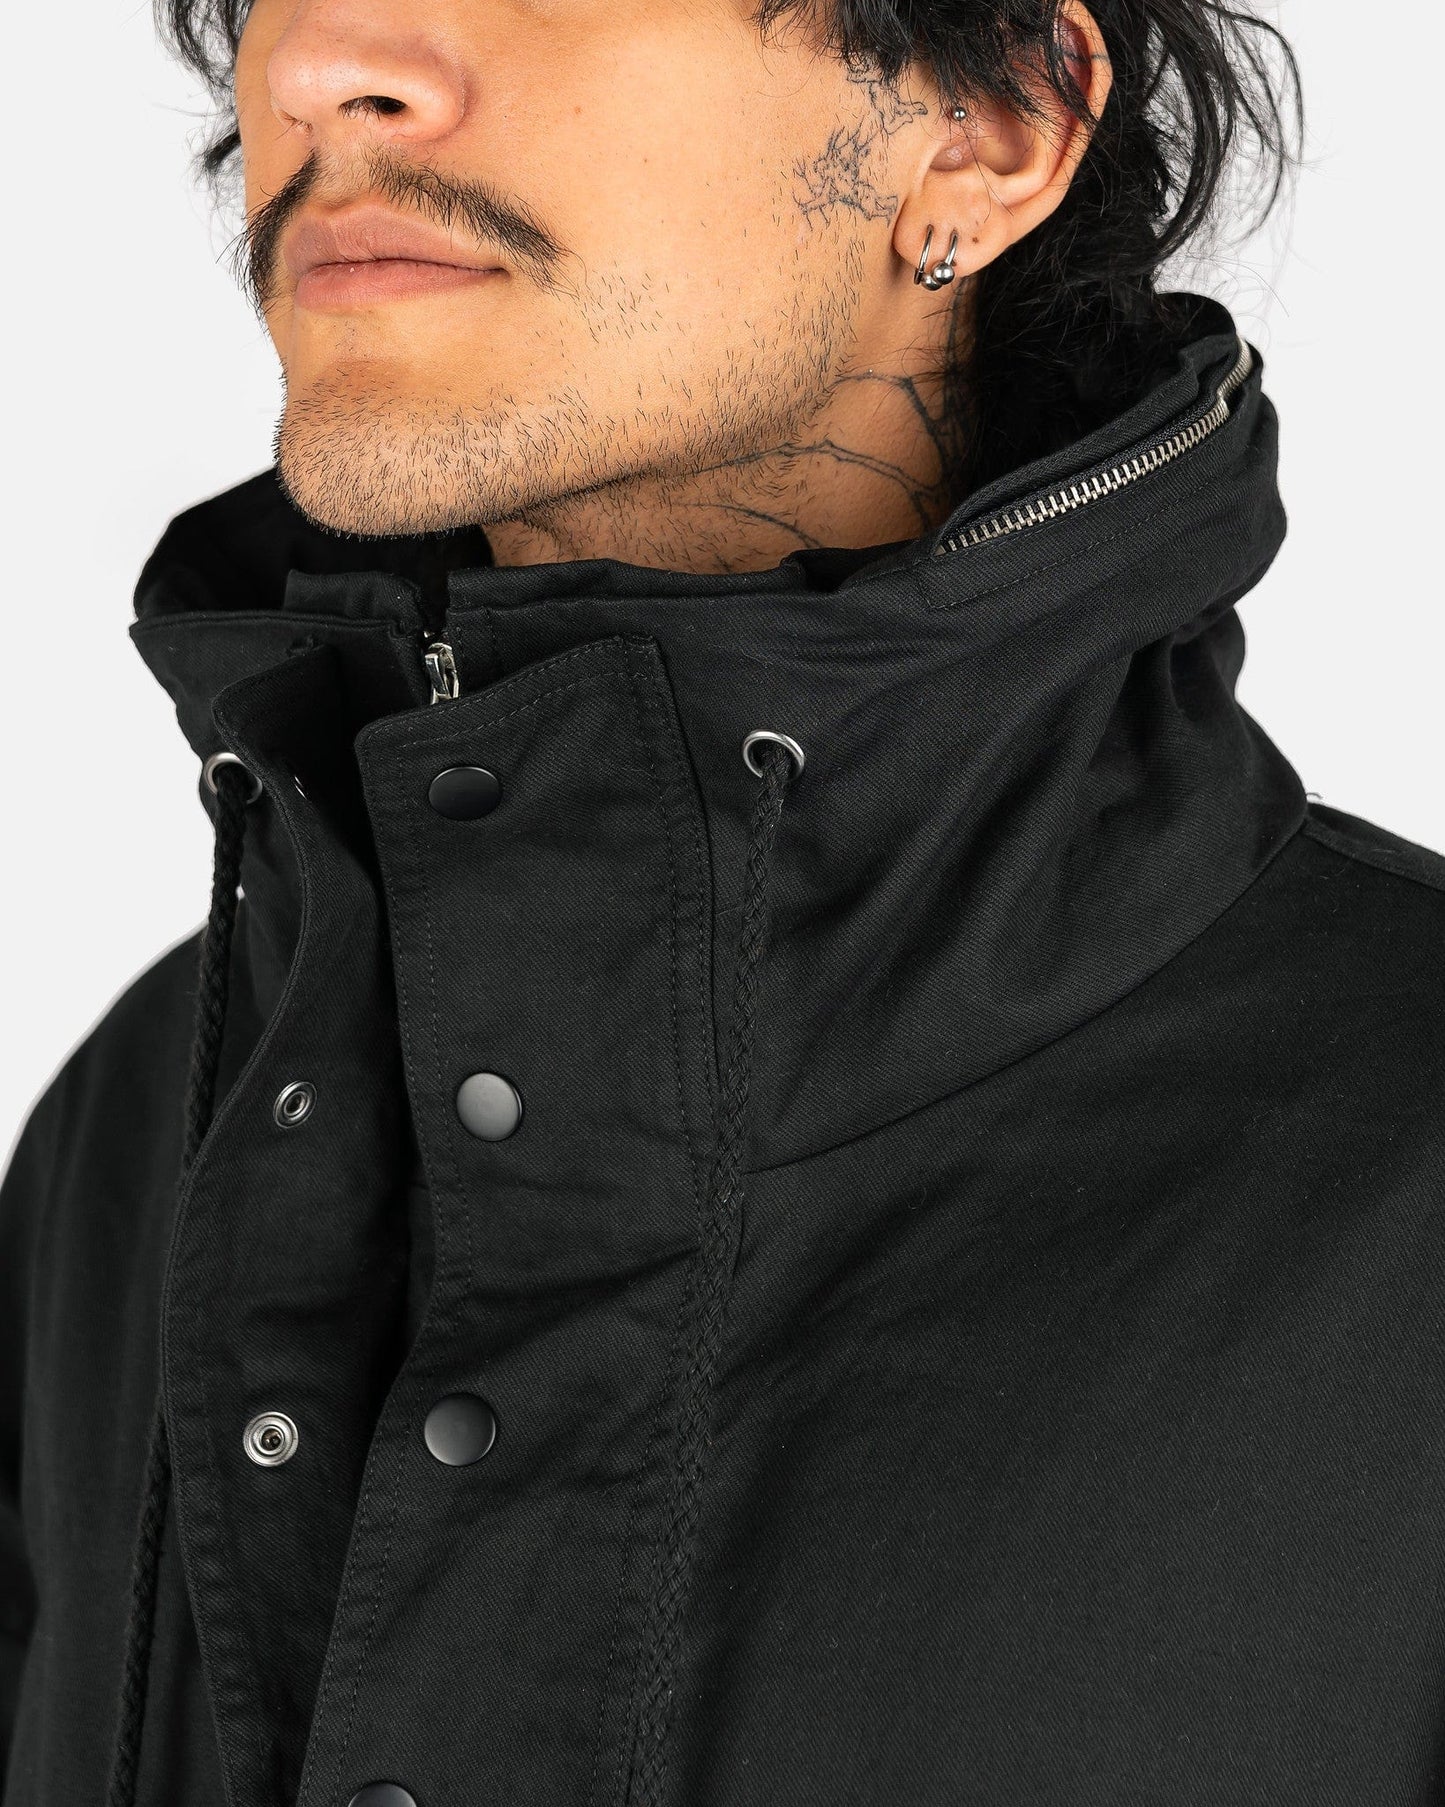 Willy Chavarria Men's Jackets Cowboy Parka in Black